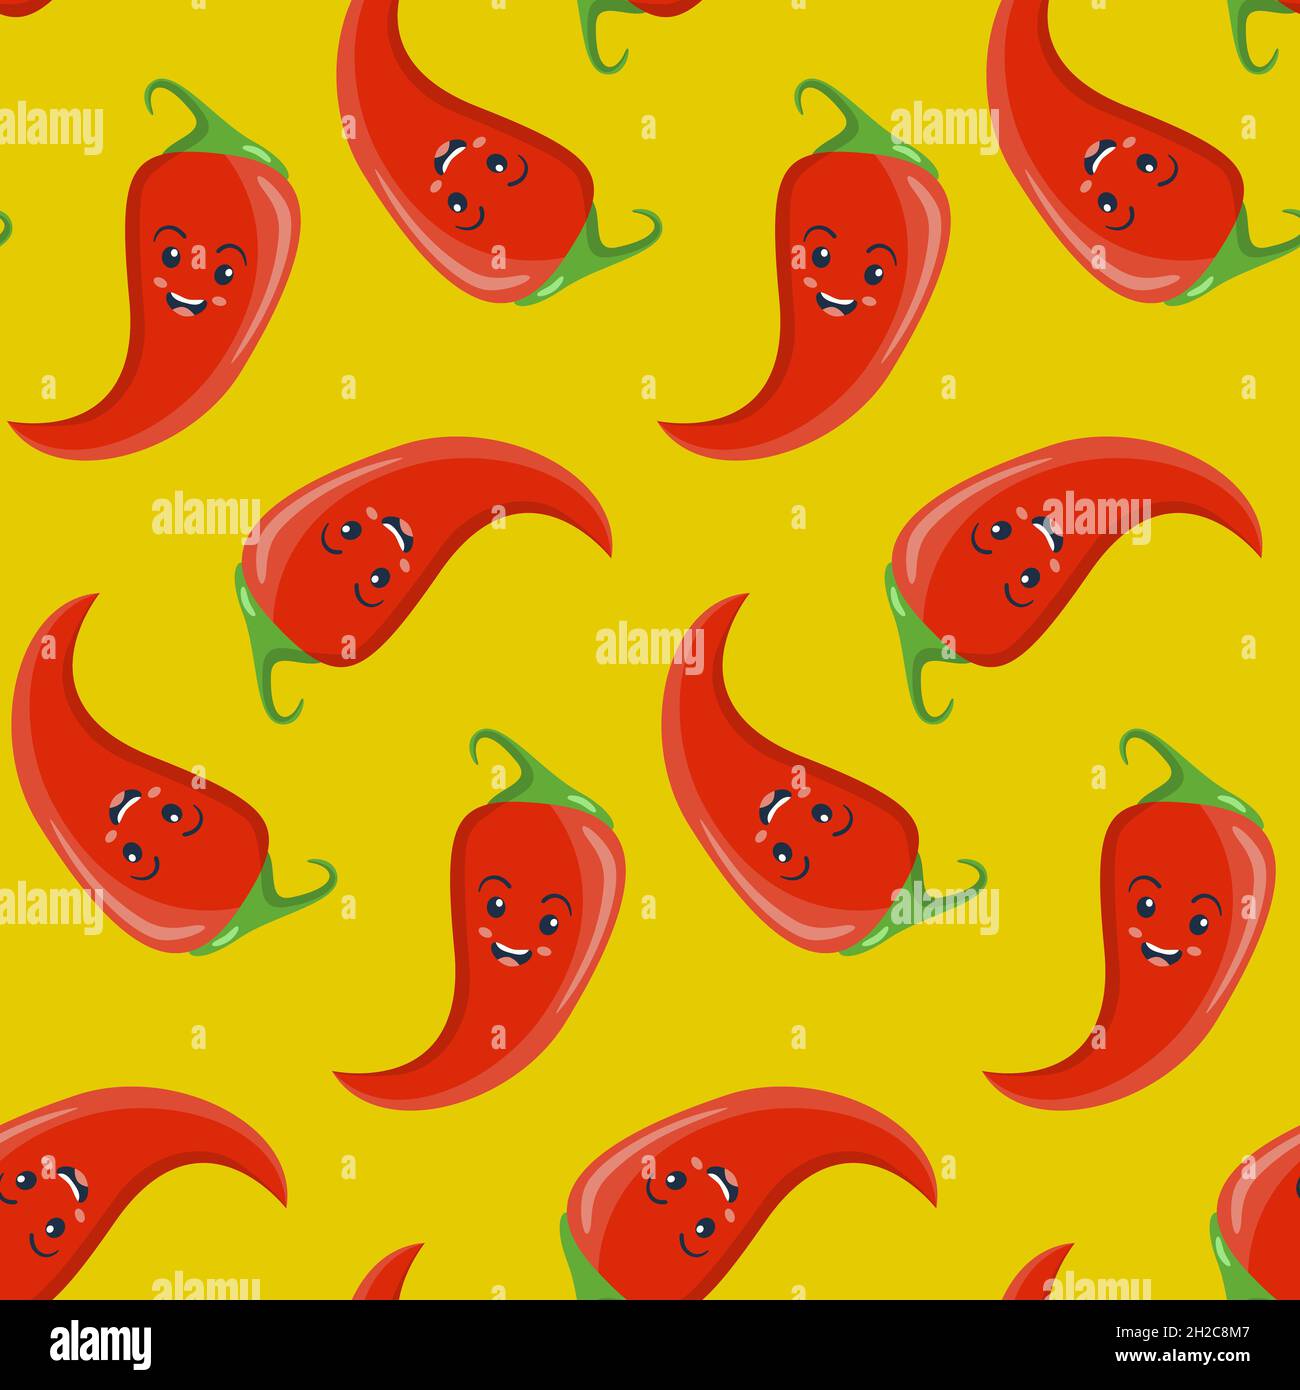 Seamless pattern, character smiling red chili pepper jalapeno, vector illustration for textiles, wallpaper and wrapping paper Stock Vector